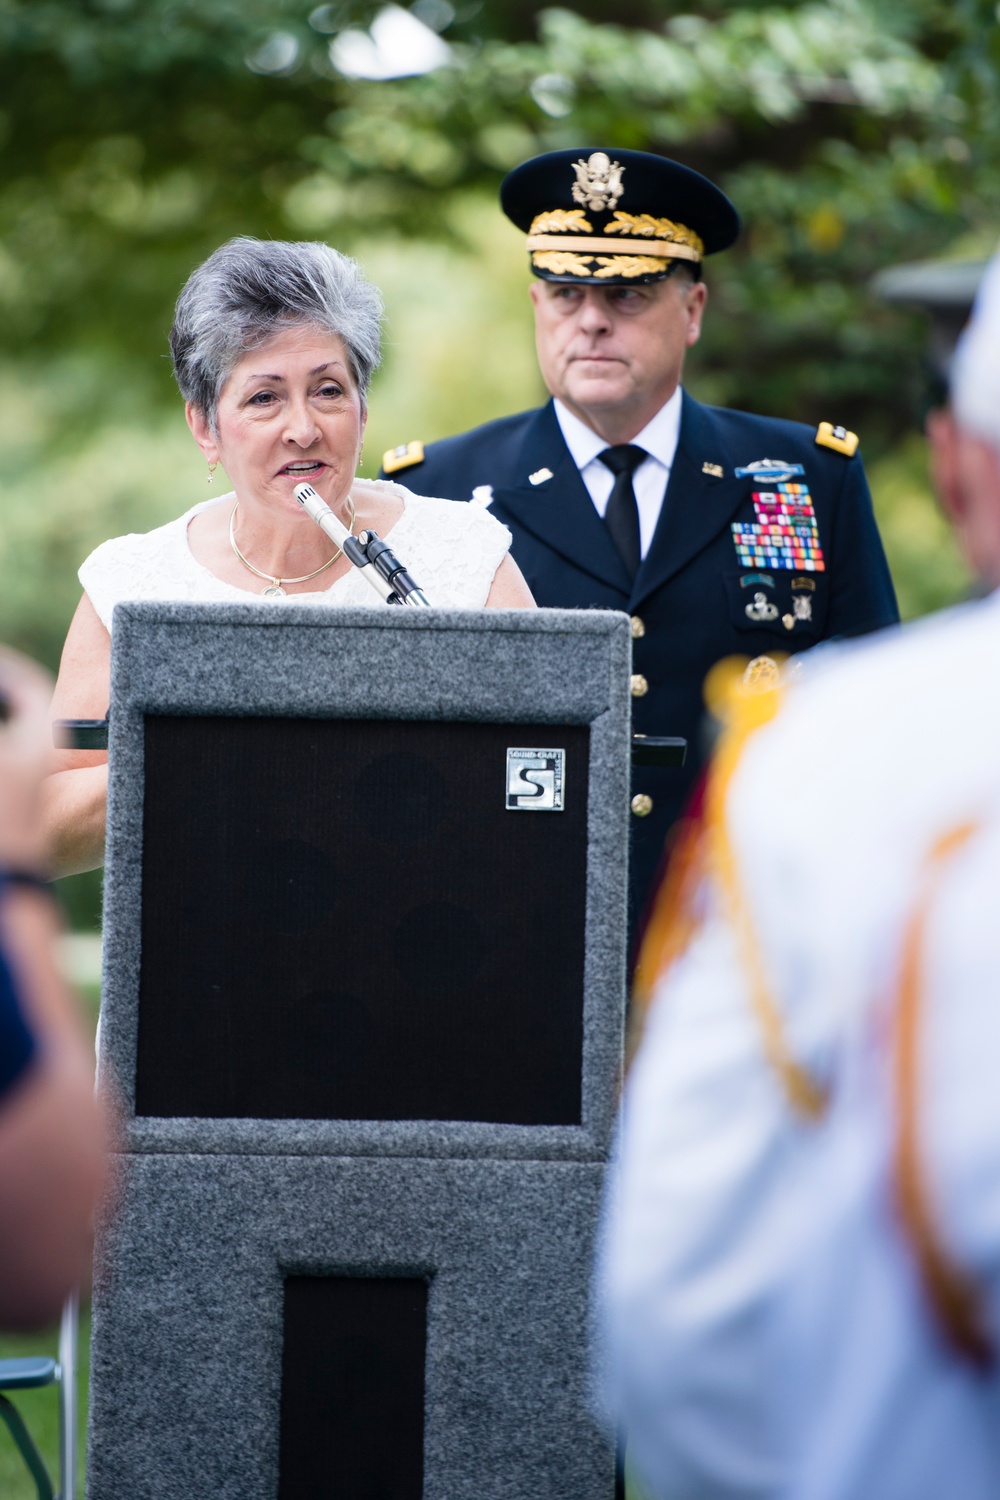 Commemorative Ceremony for 80th Gold Star Mother’s Day